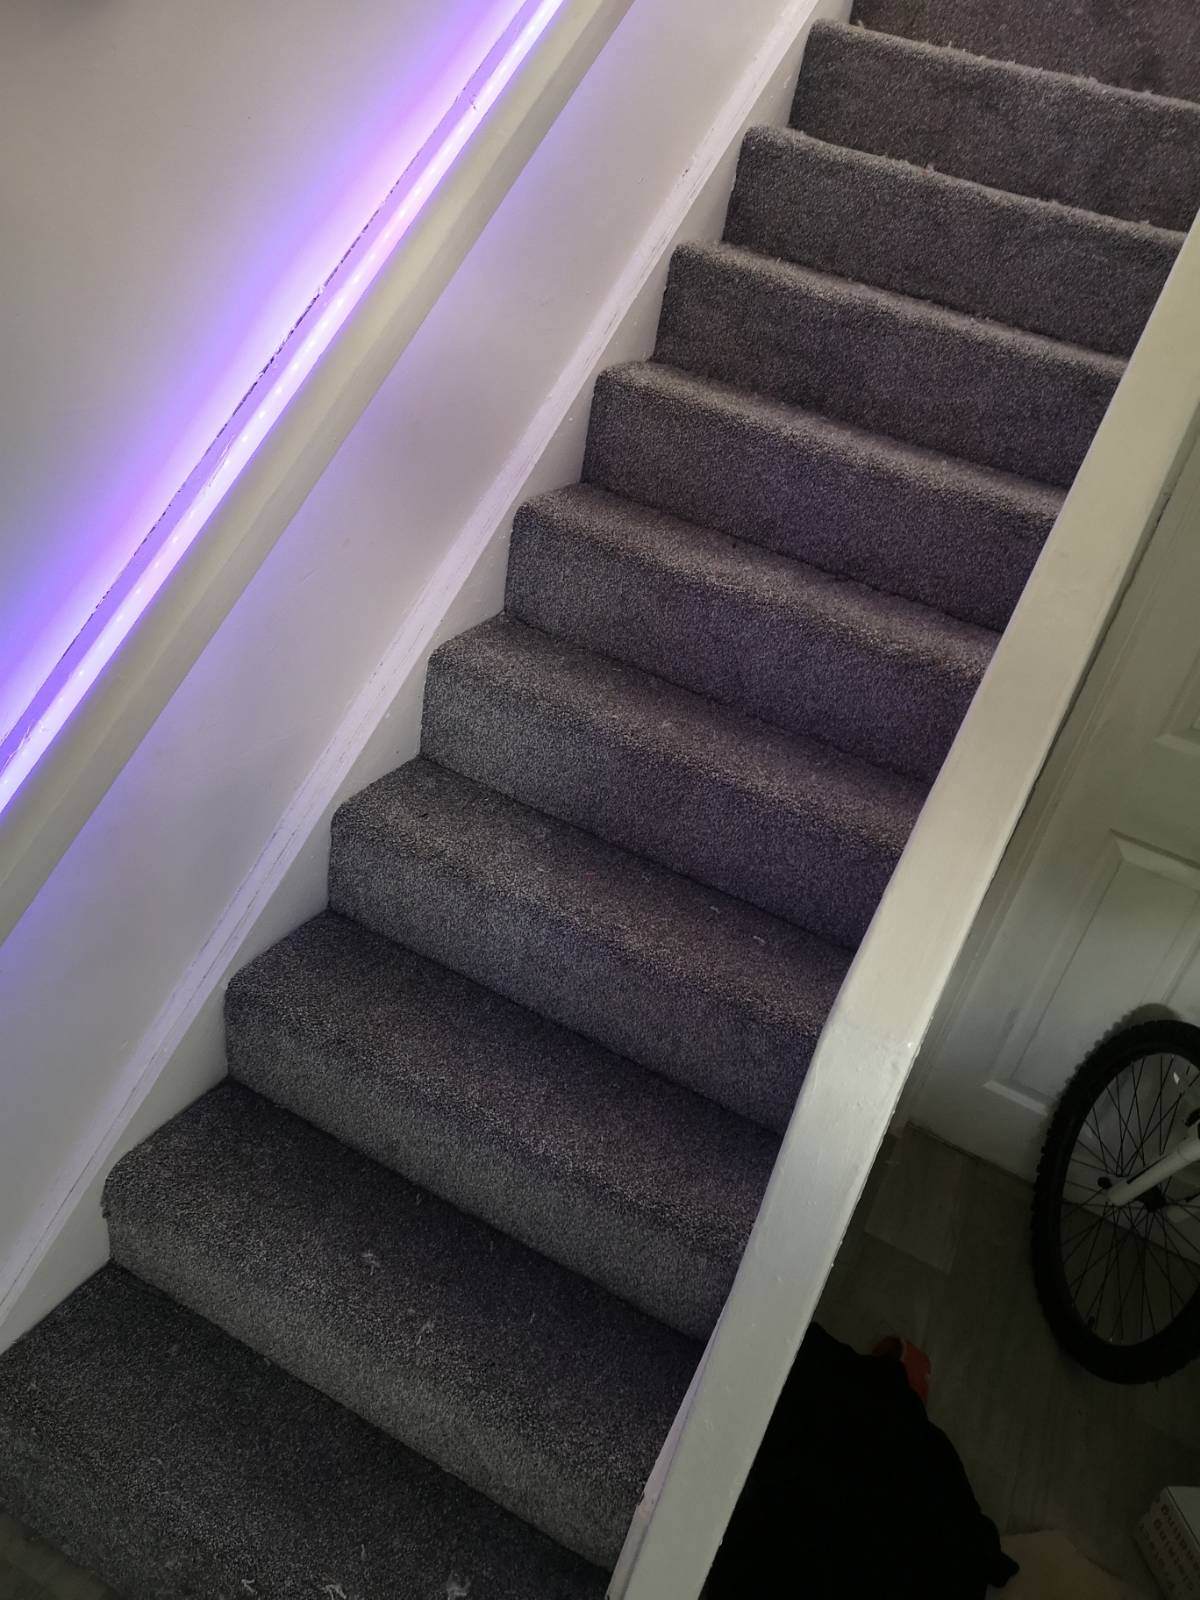 grey carpet fitting on staircase with purple lighting under banister